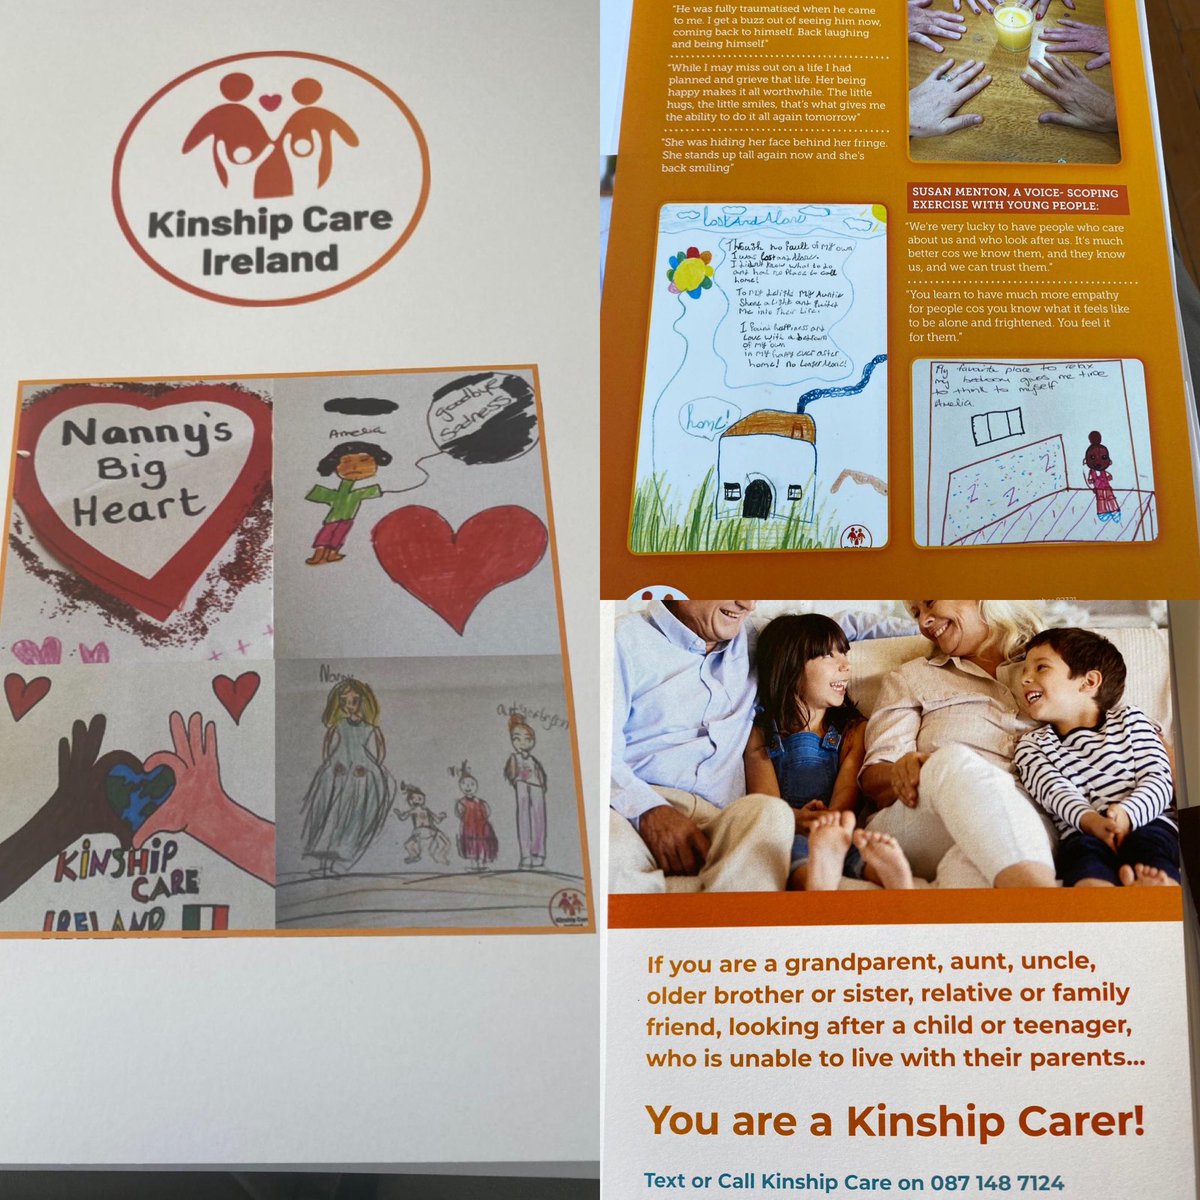 Our colleagues Norma and Grainne attended Kinship Care Ireland in Richmond Education and Event Centre today to meet and discuss the policy development on the rights of children in Informal Kinship Care. @KinshipcareIrl @TREOIR @OCO_ireland @ChildRightsIRL